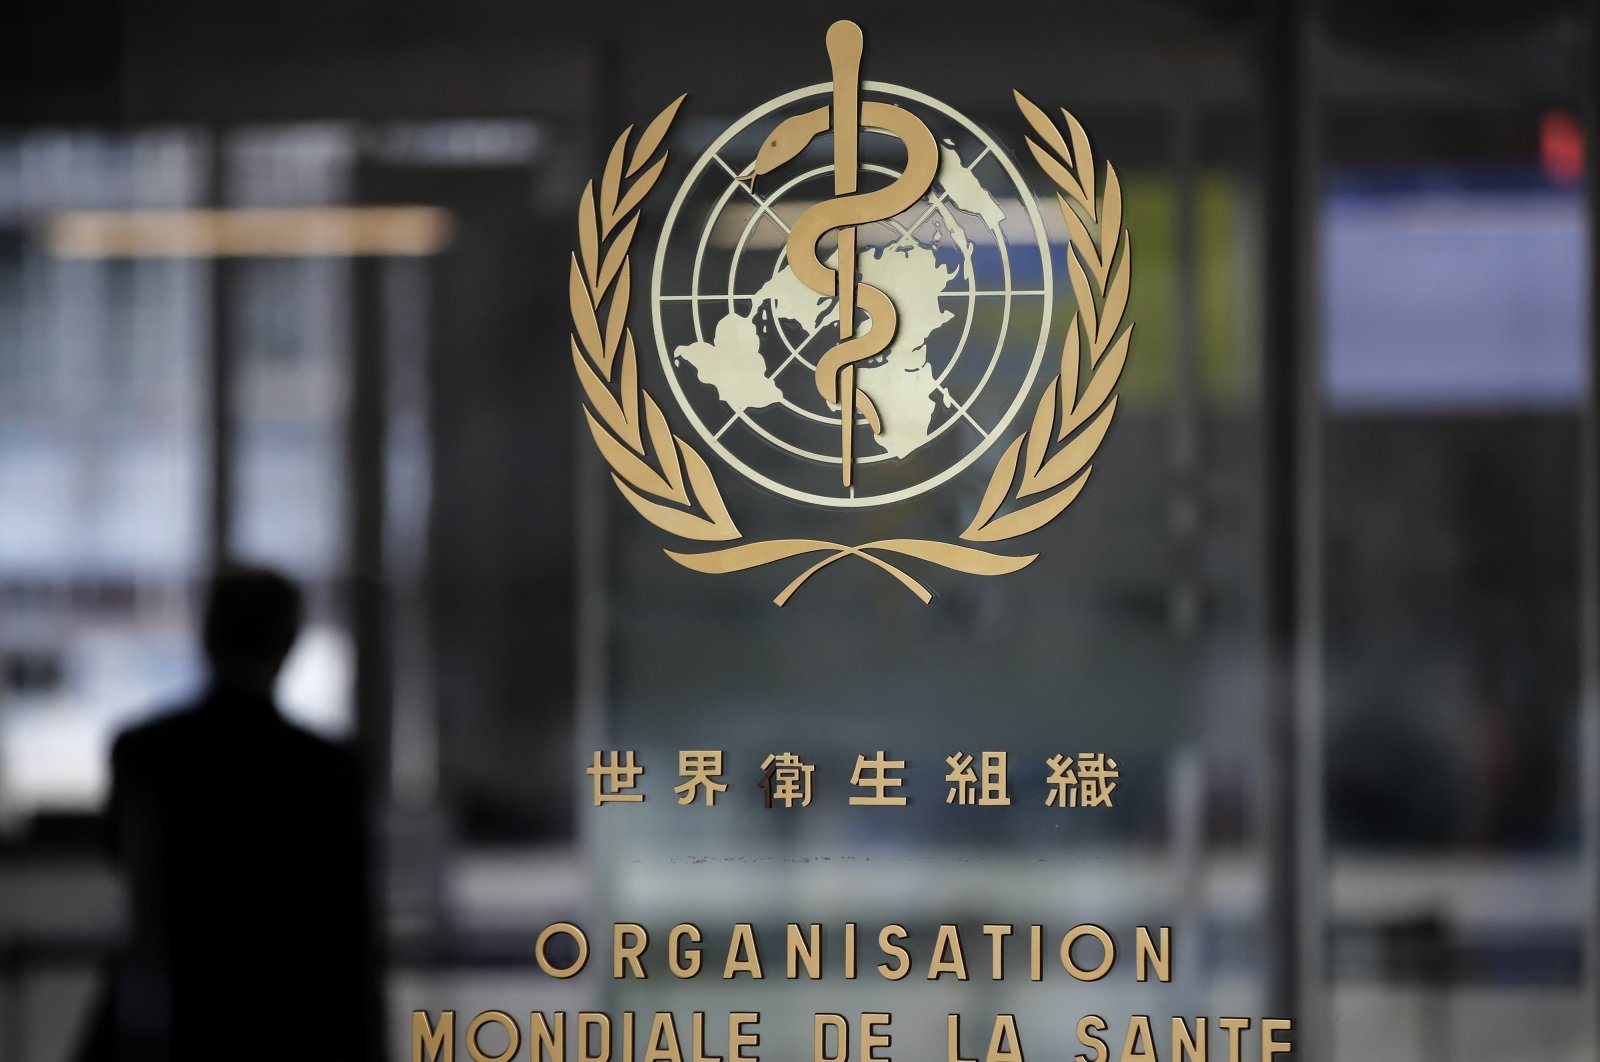 The World Health Organization (WHO) emblem on a glass entrance door at the WHO headquarters in Geneva, Switzerland, Feb. 18, 2020. (Photo by Getty Images)